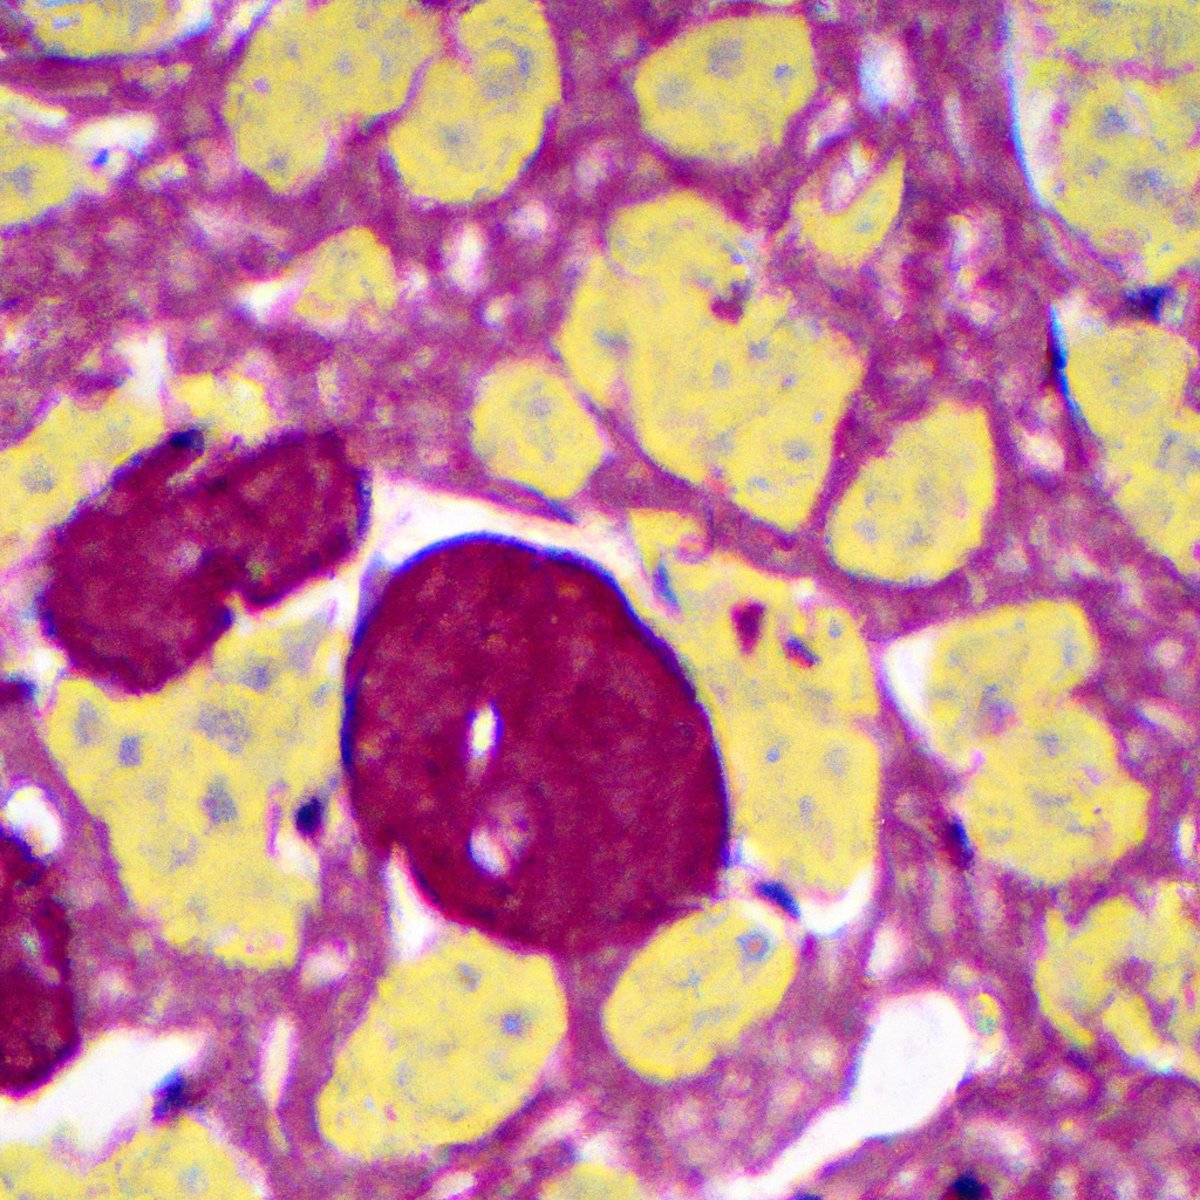 Close-up view of diseased gallbladder with yellow nodules and granulomatous formations, surrounded by blood vessels and connective fibers.